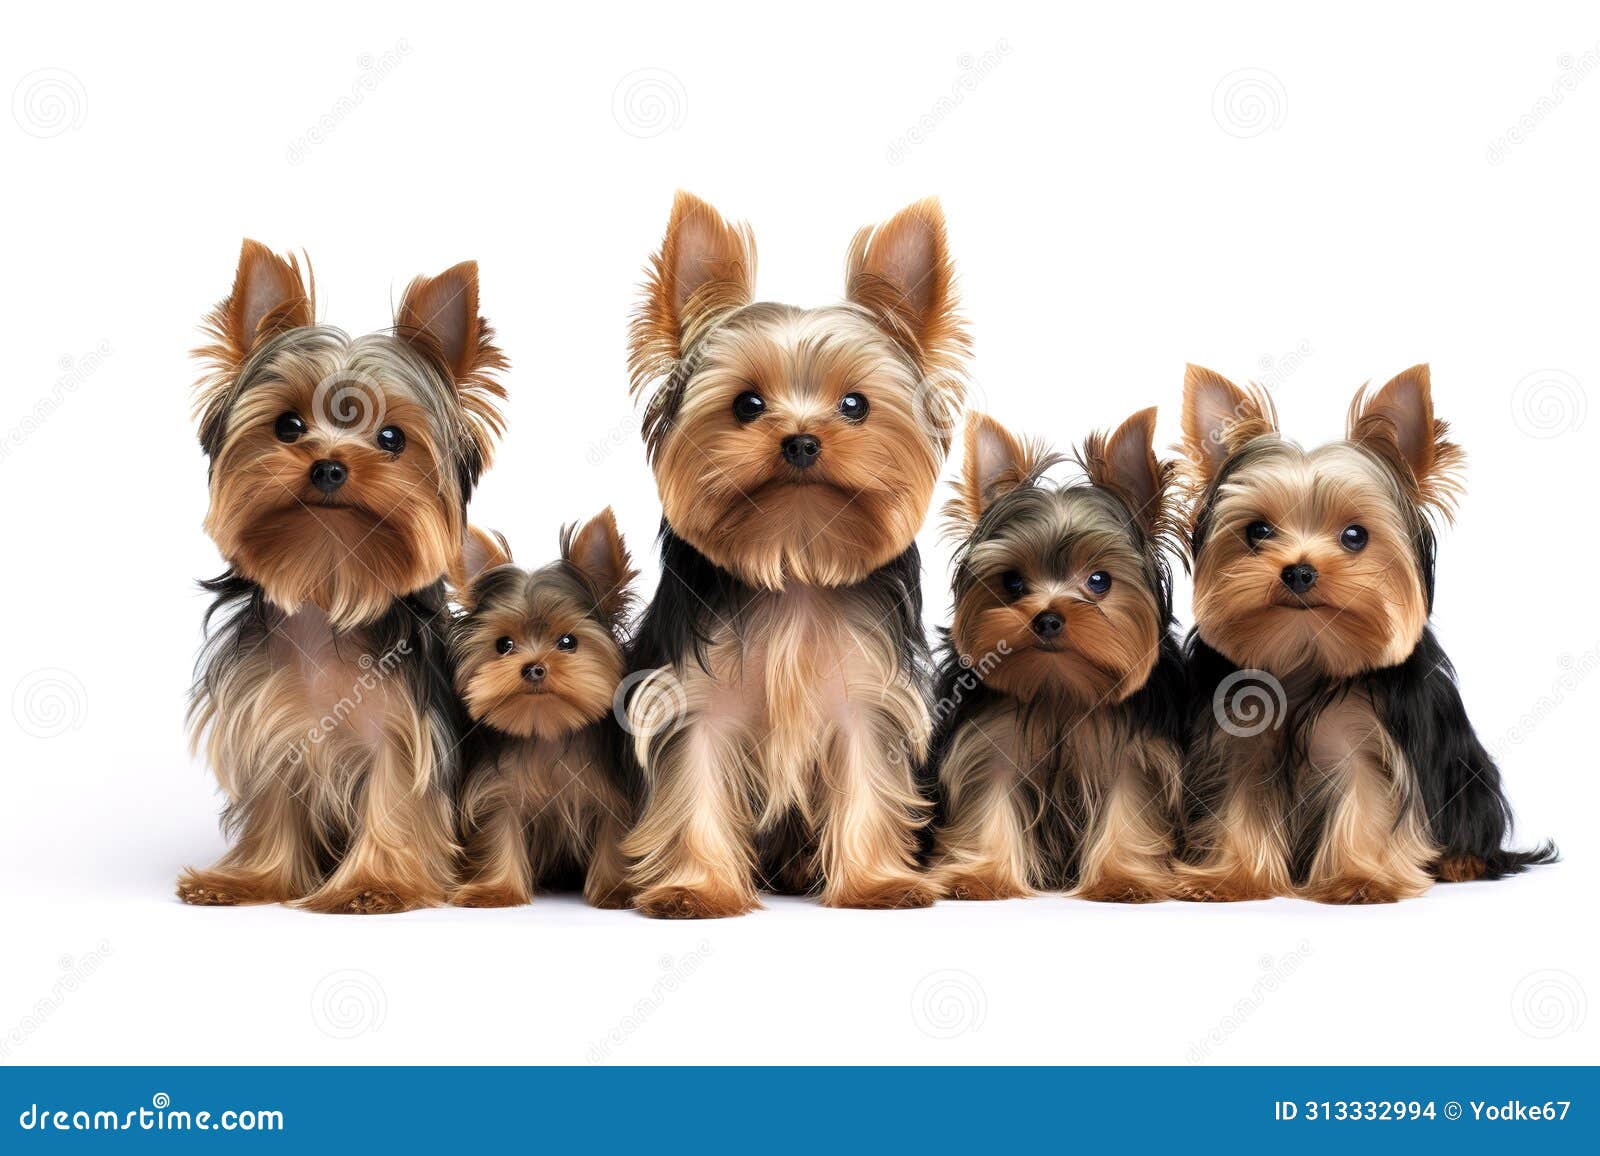 image of family of yorkshire terrier dog on white background. pet. animals.